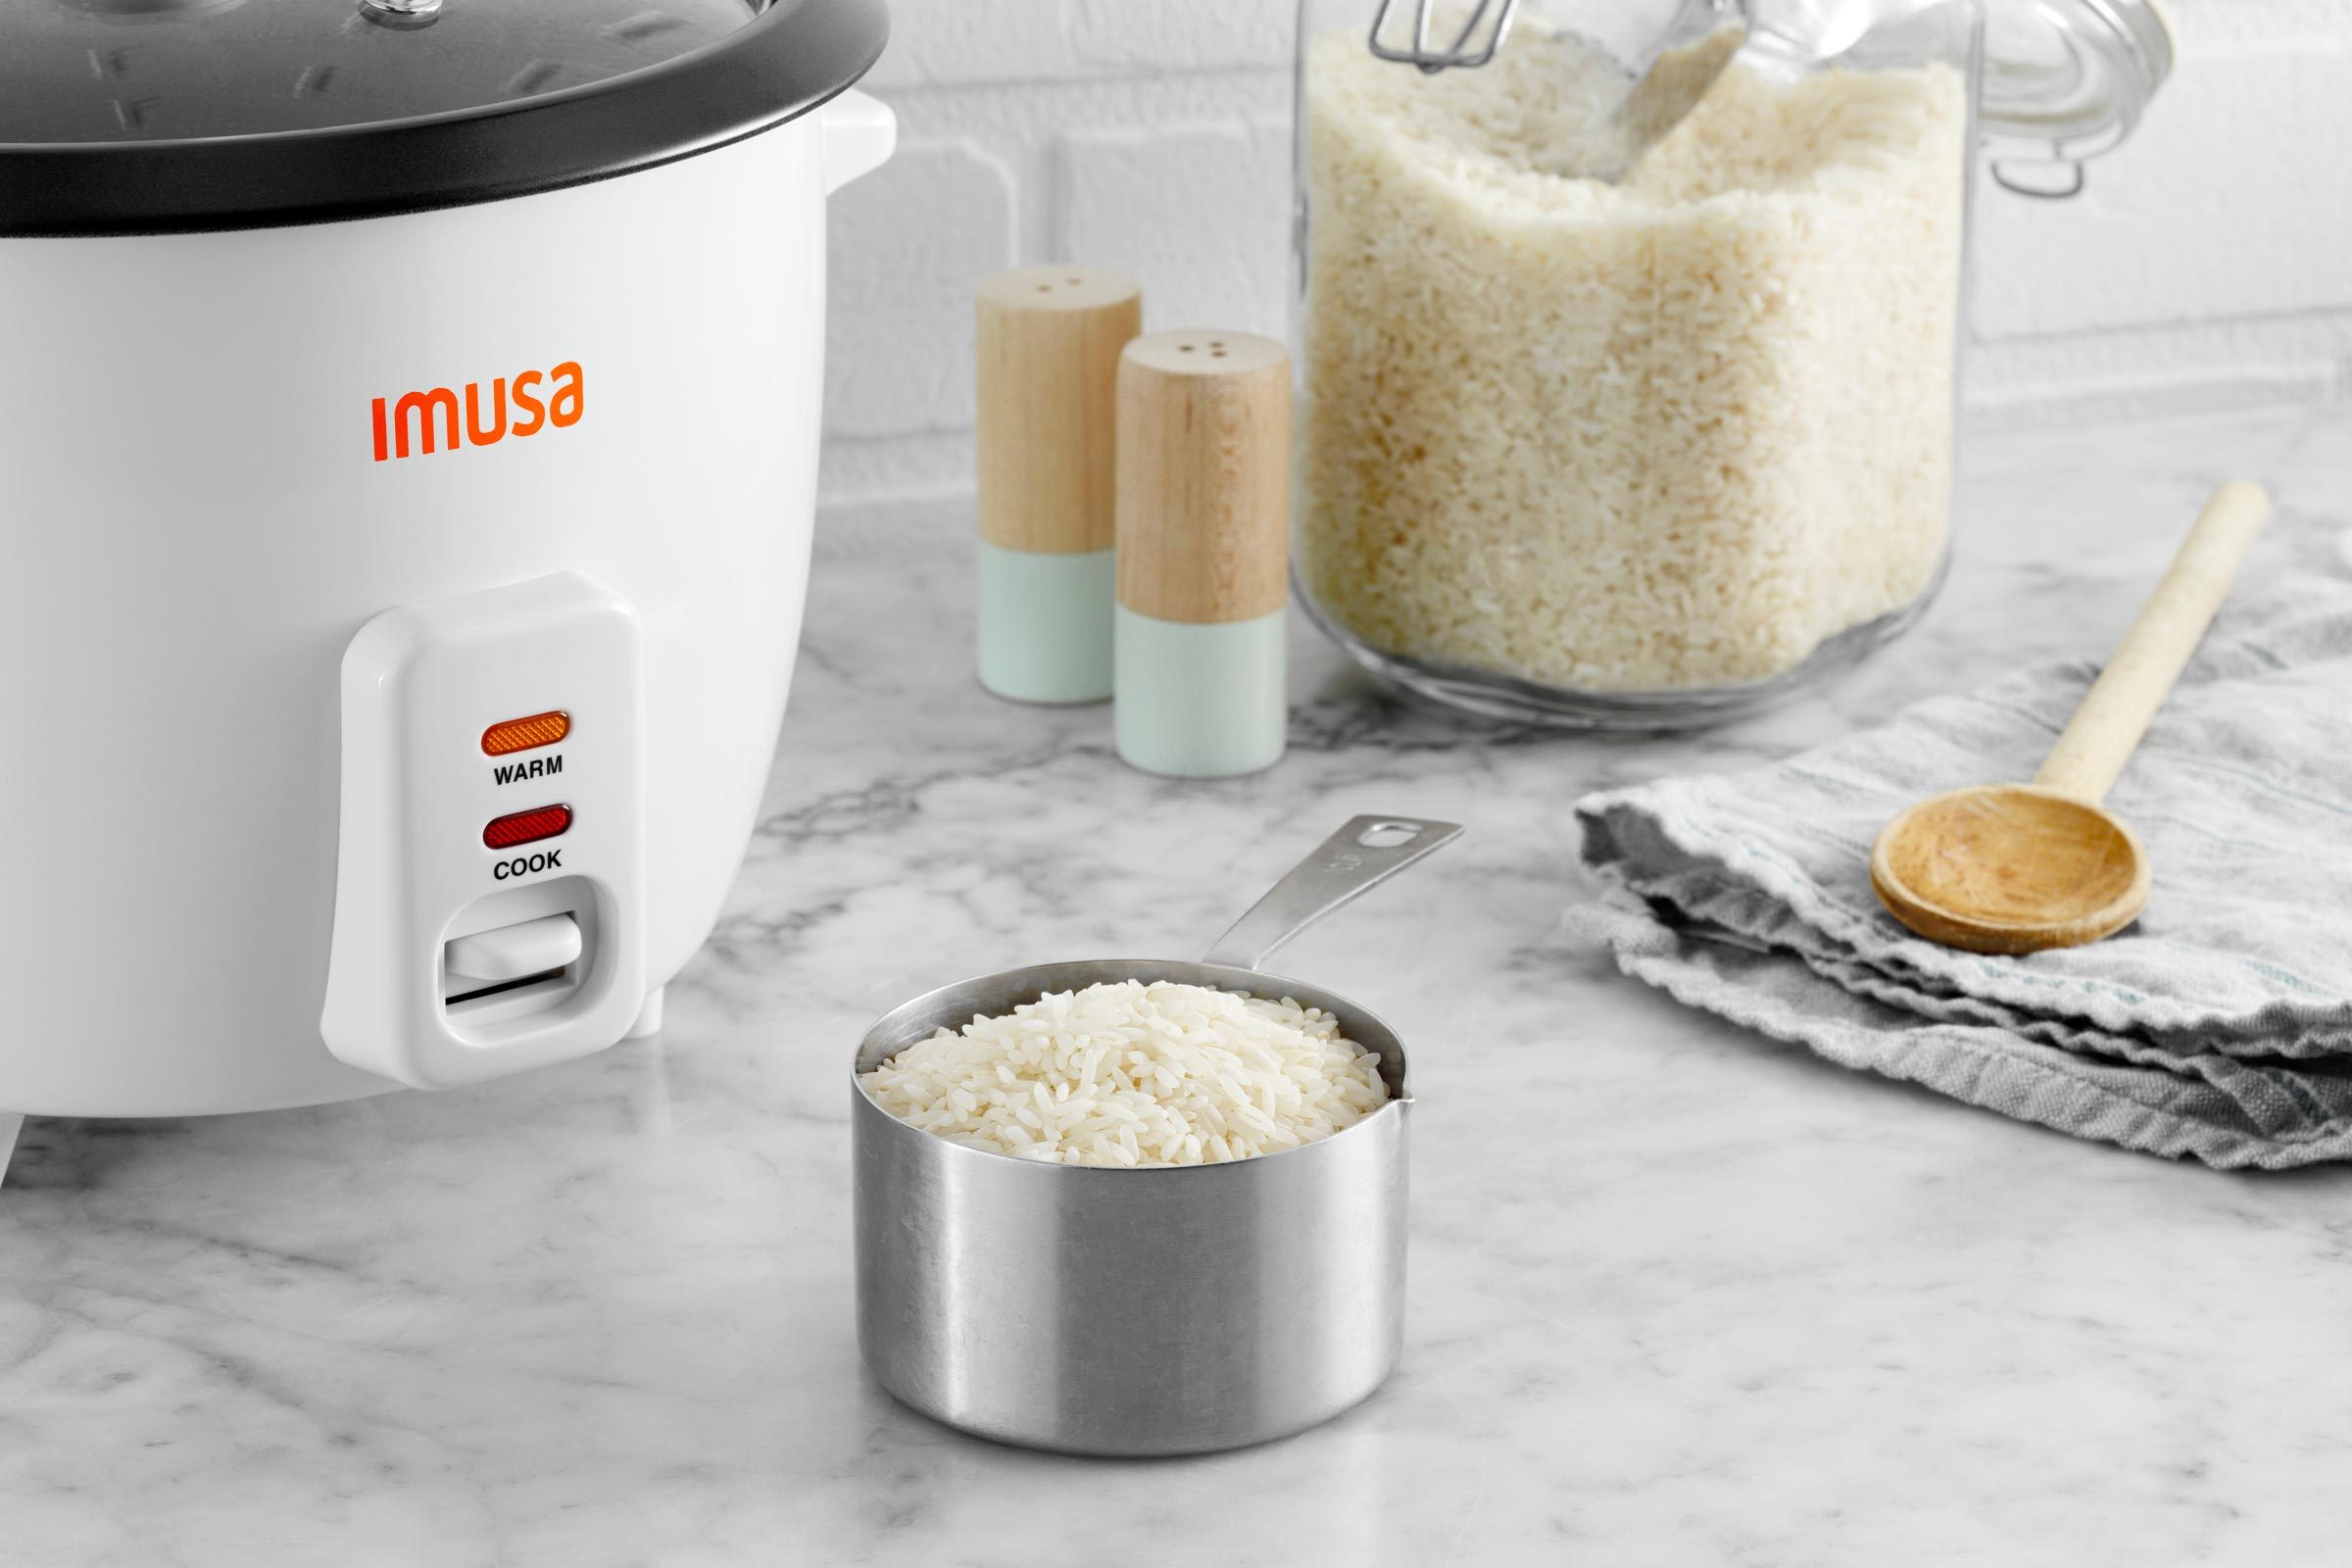 Professional Series 12 Cups Residential Rice Cooker in the Rice